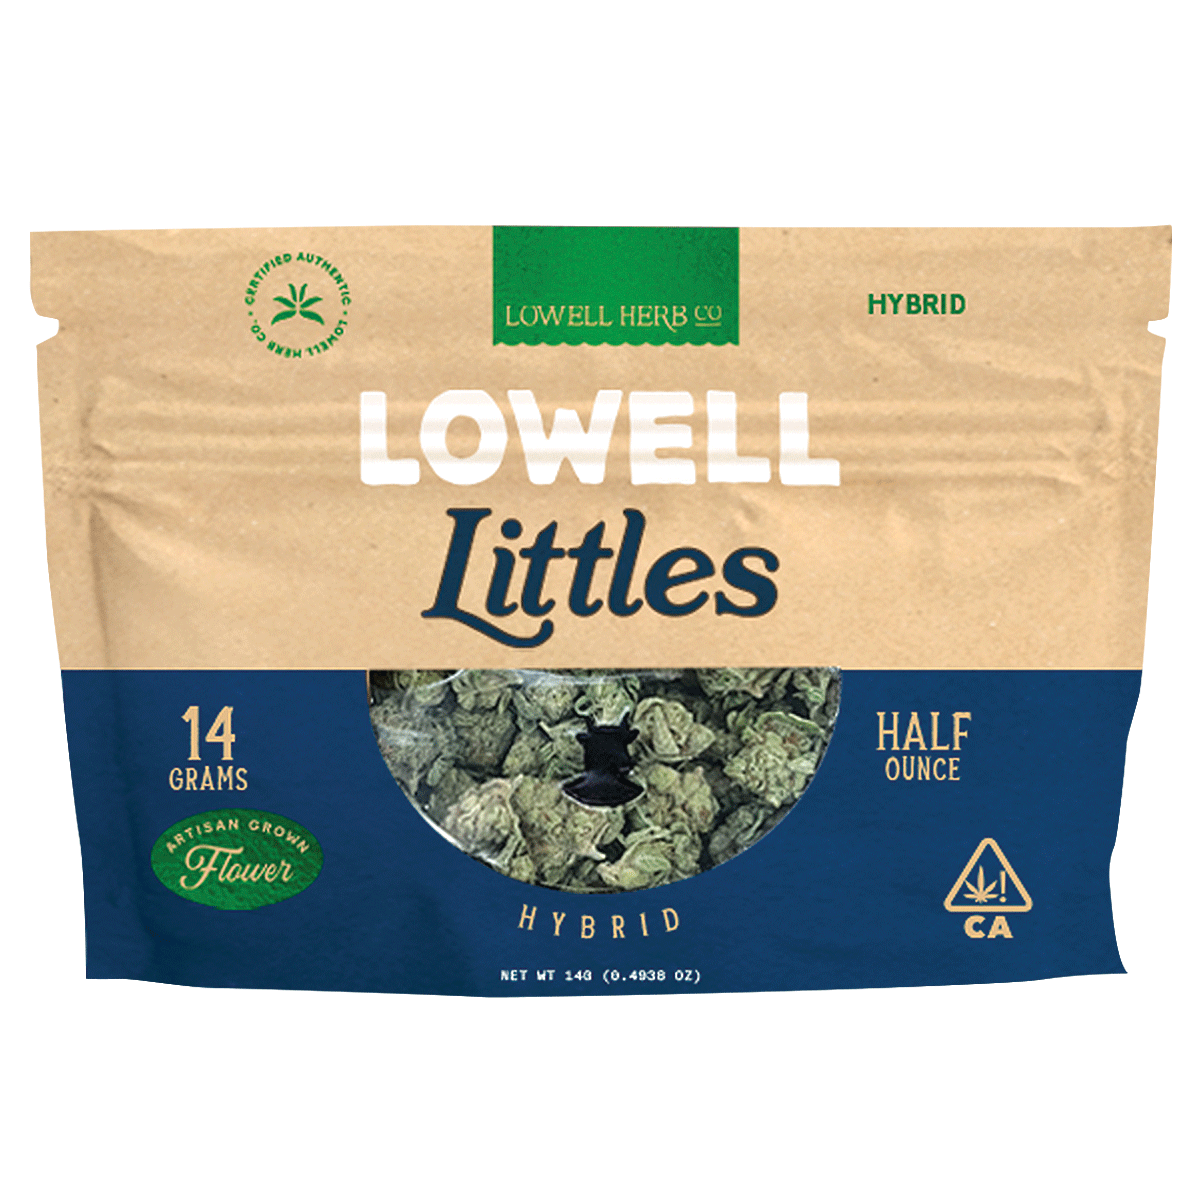 Lowell Littles Cereal Milk